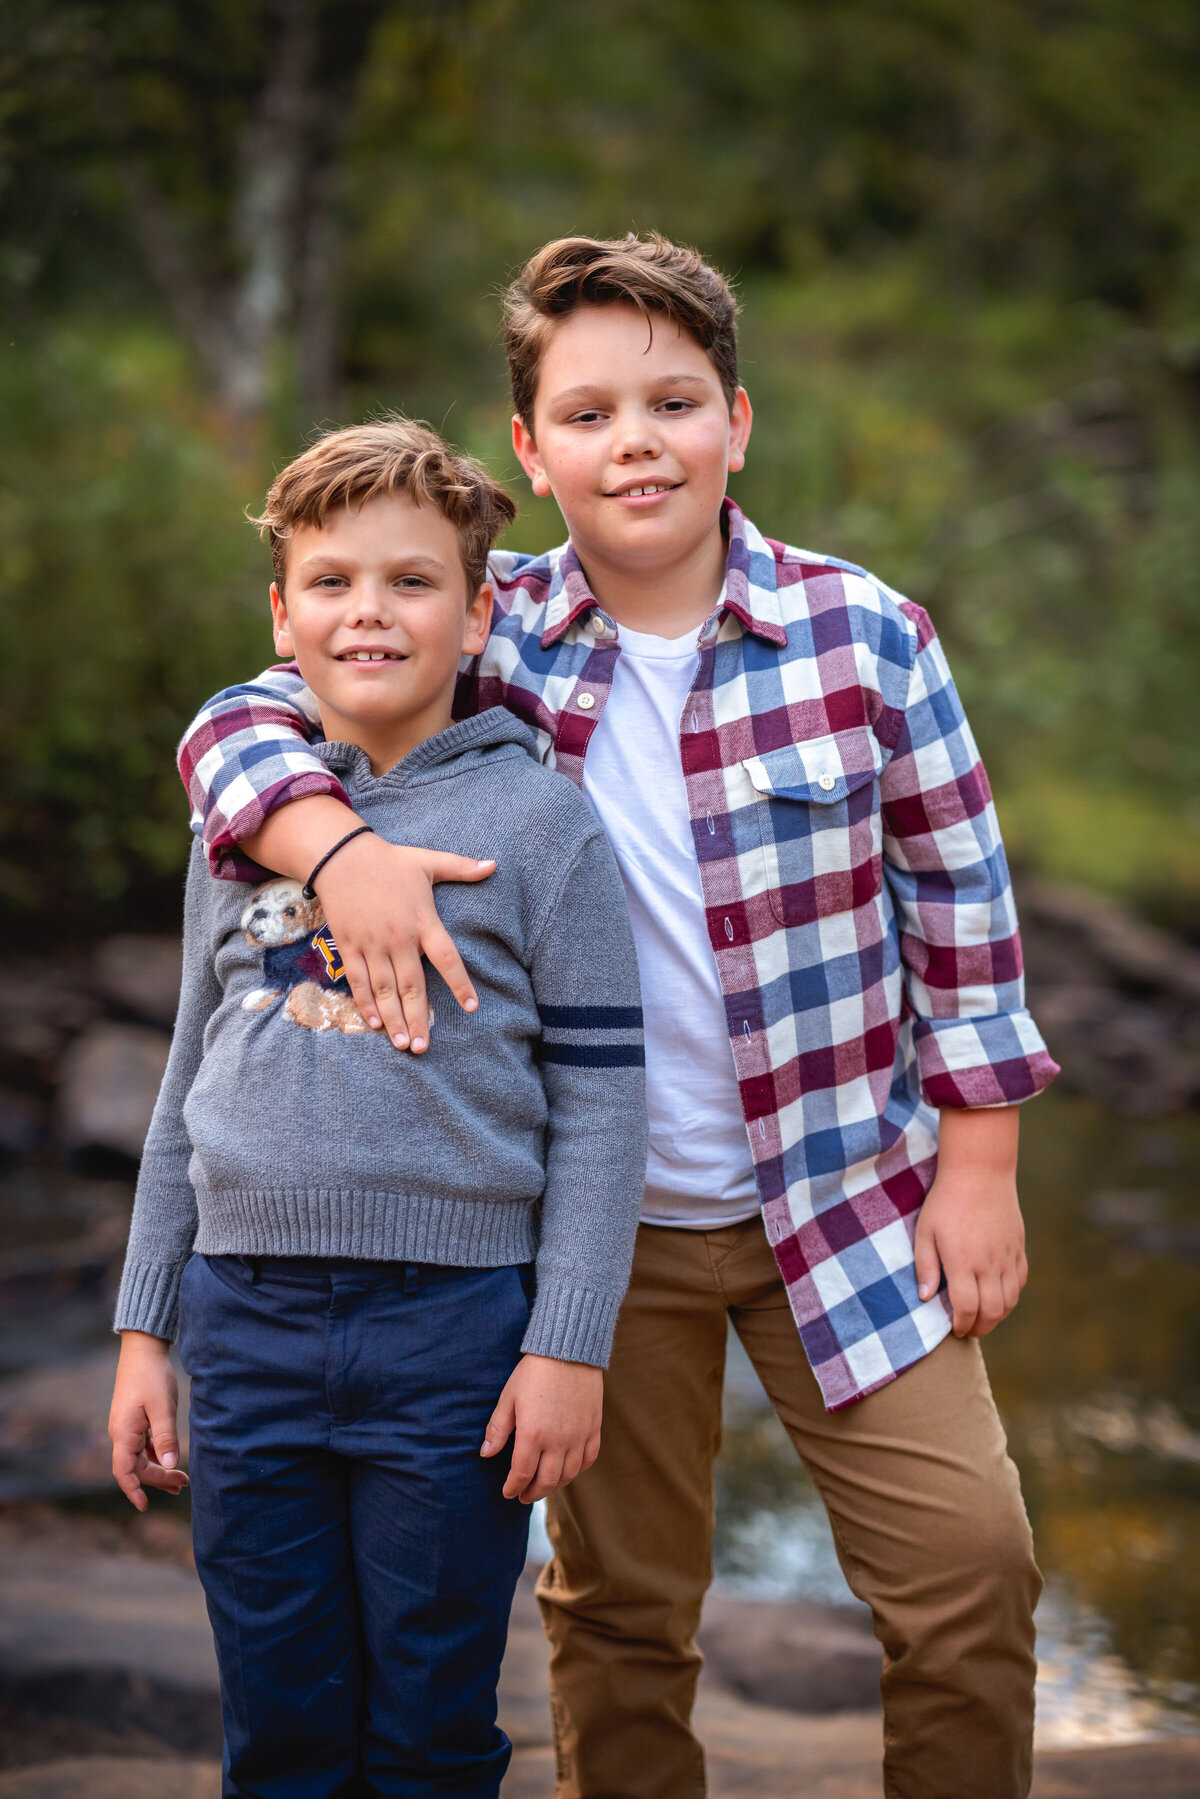 Two brothers embrace and smile for the camera during their family photography session.